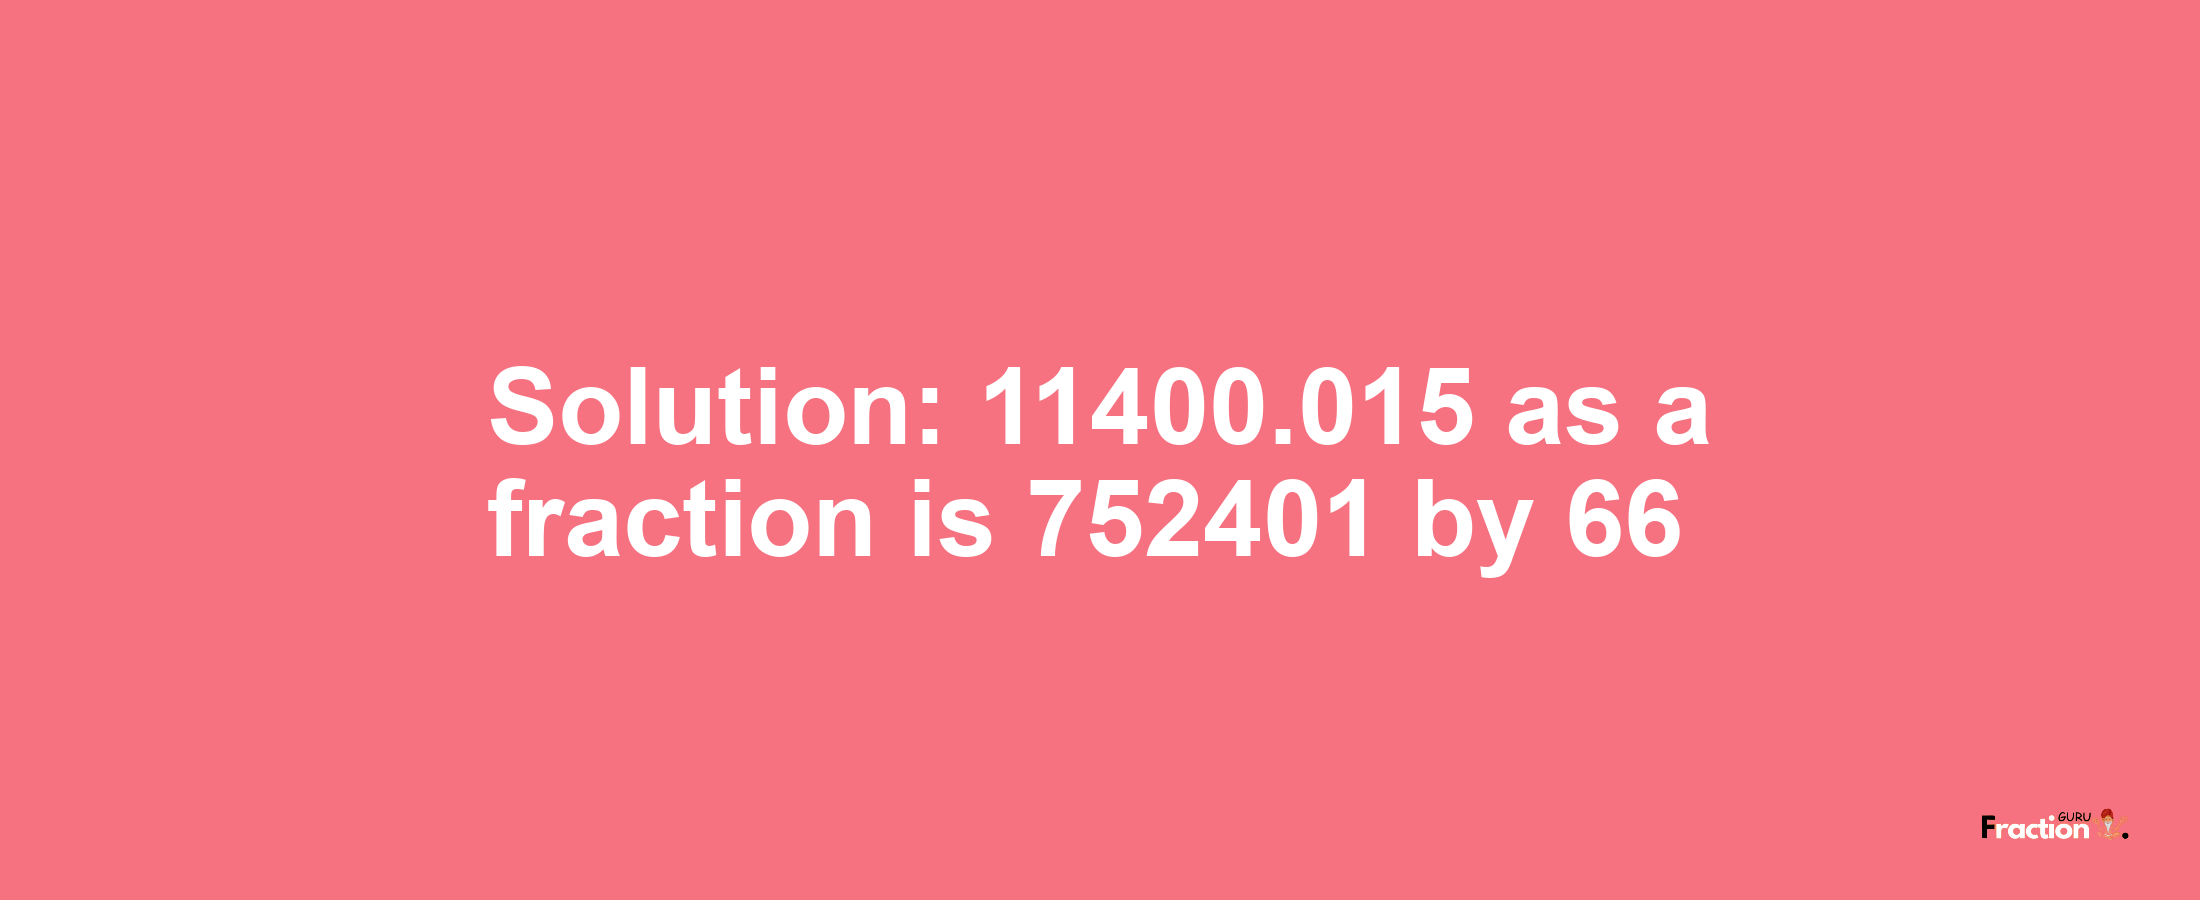 Solution:11400.015 as a fraction is 752401/66